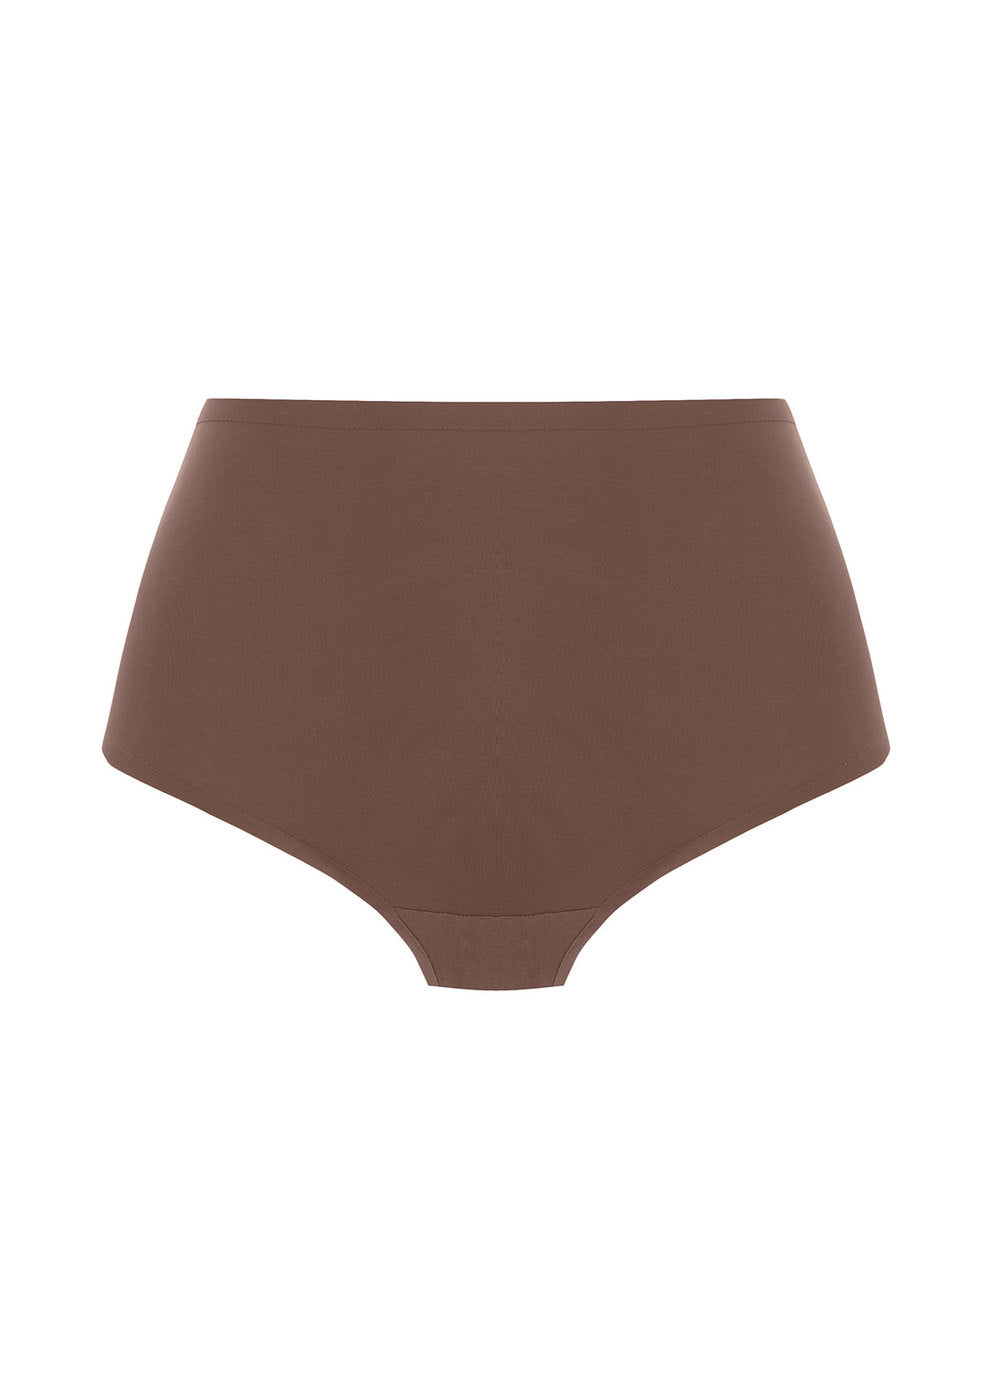 Fantasie Smoothease Invisible Stretch Coffee Roast Briefs